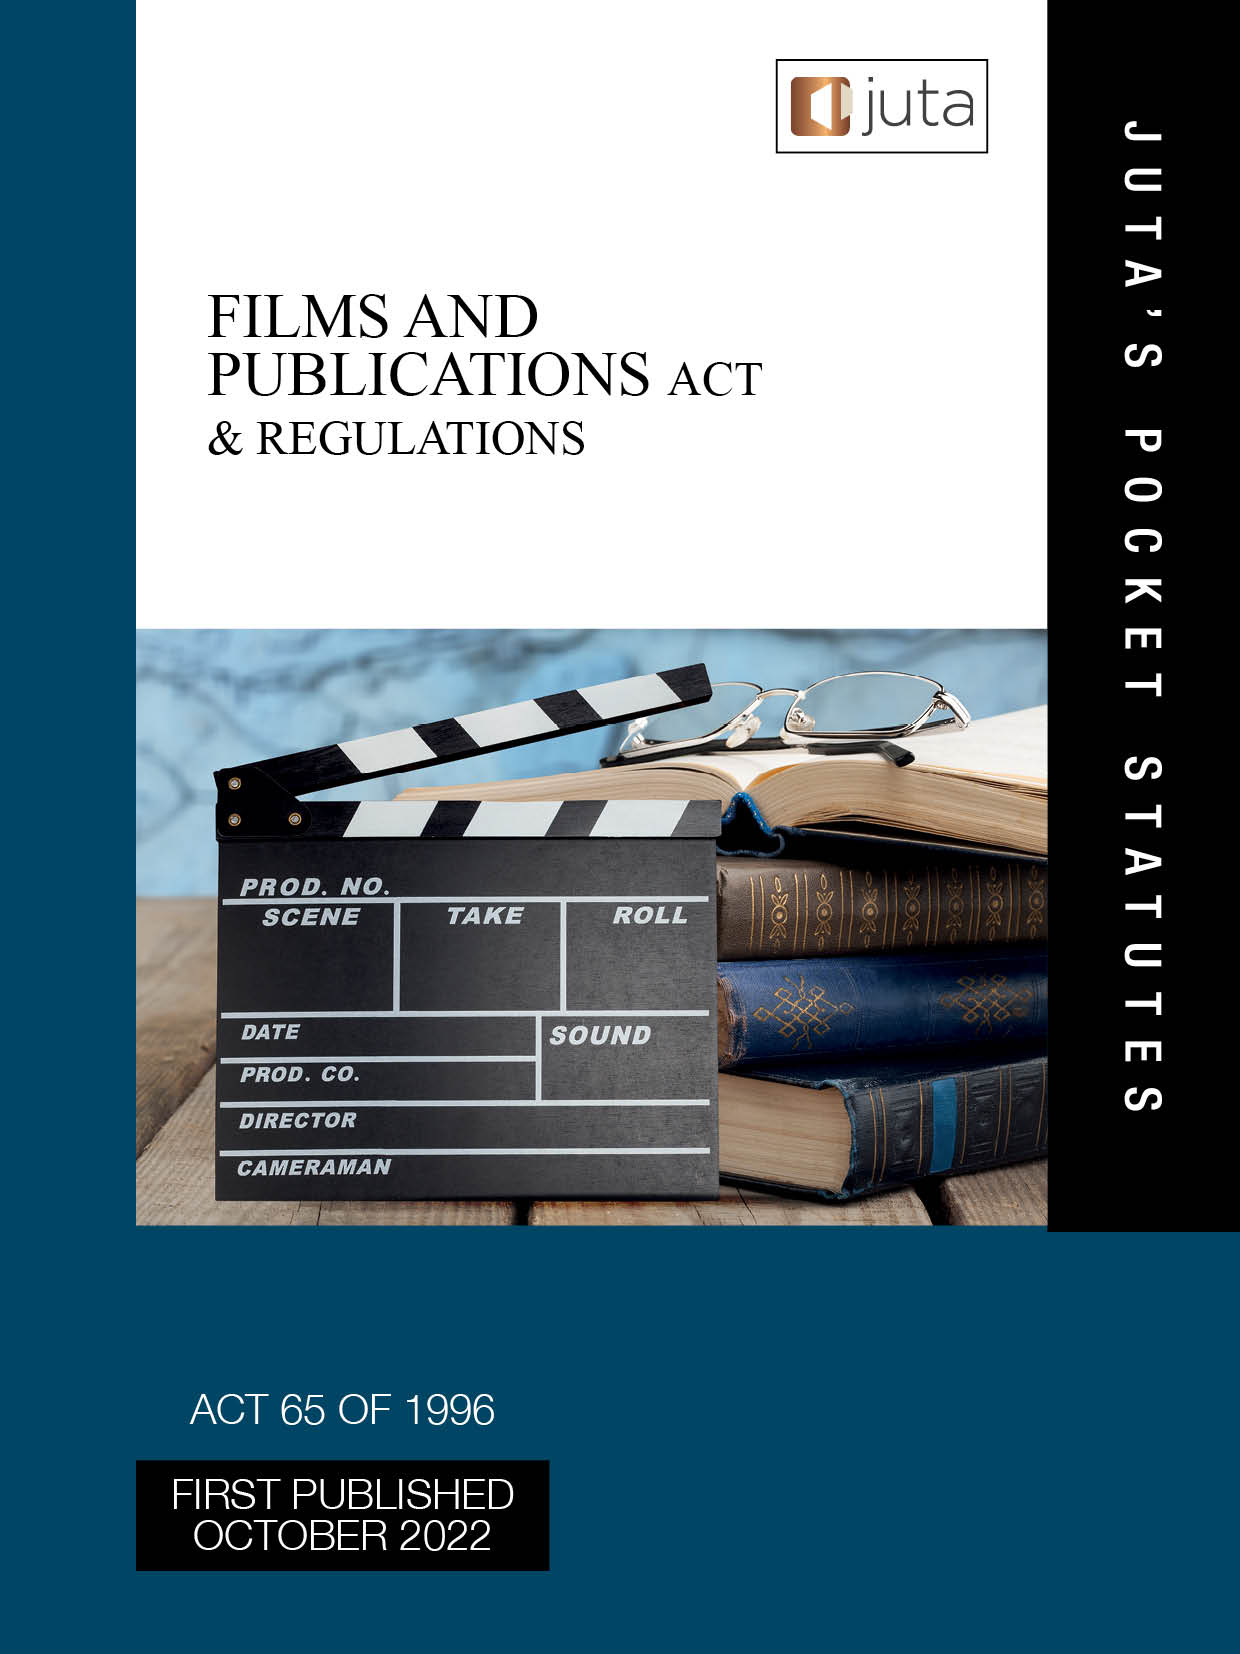 Films and Publications Act 65 of 1996 & Regulations